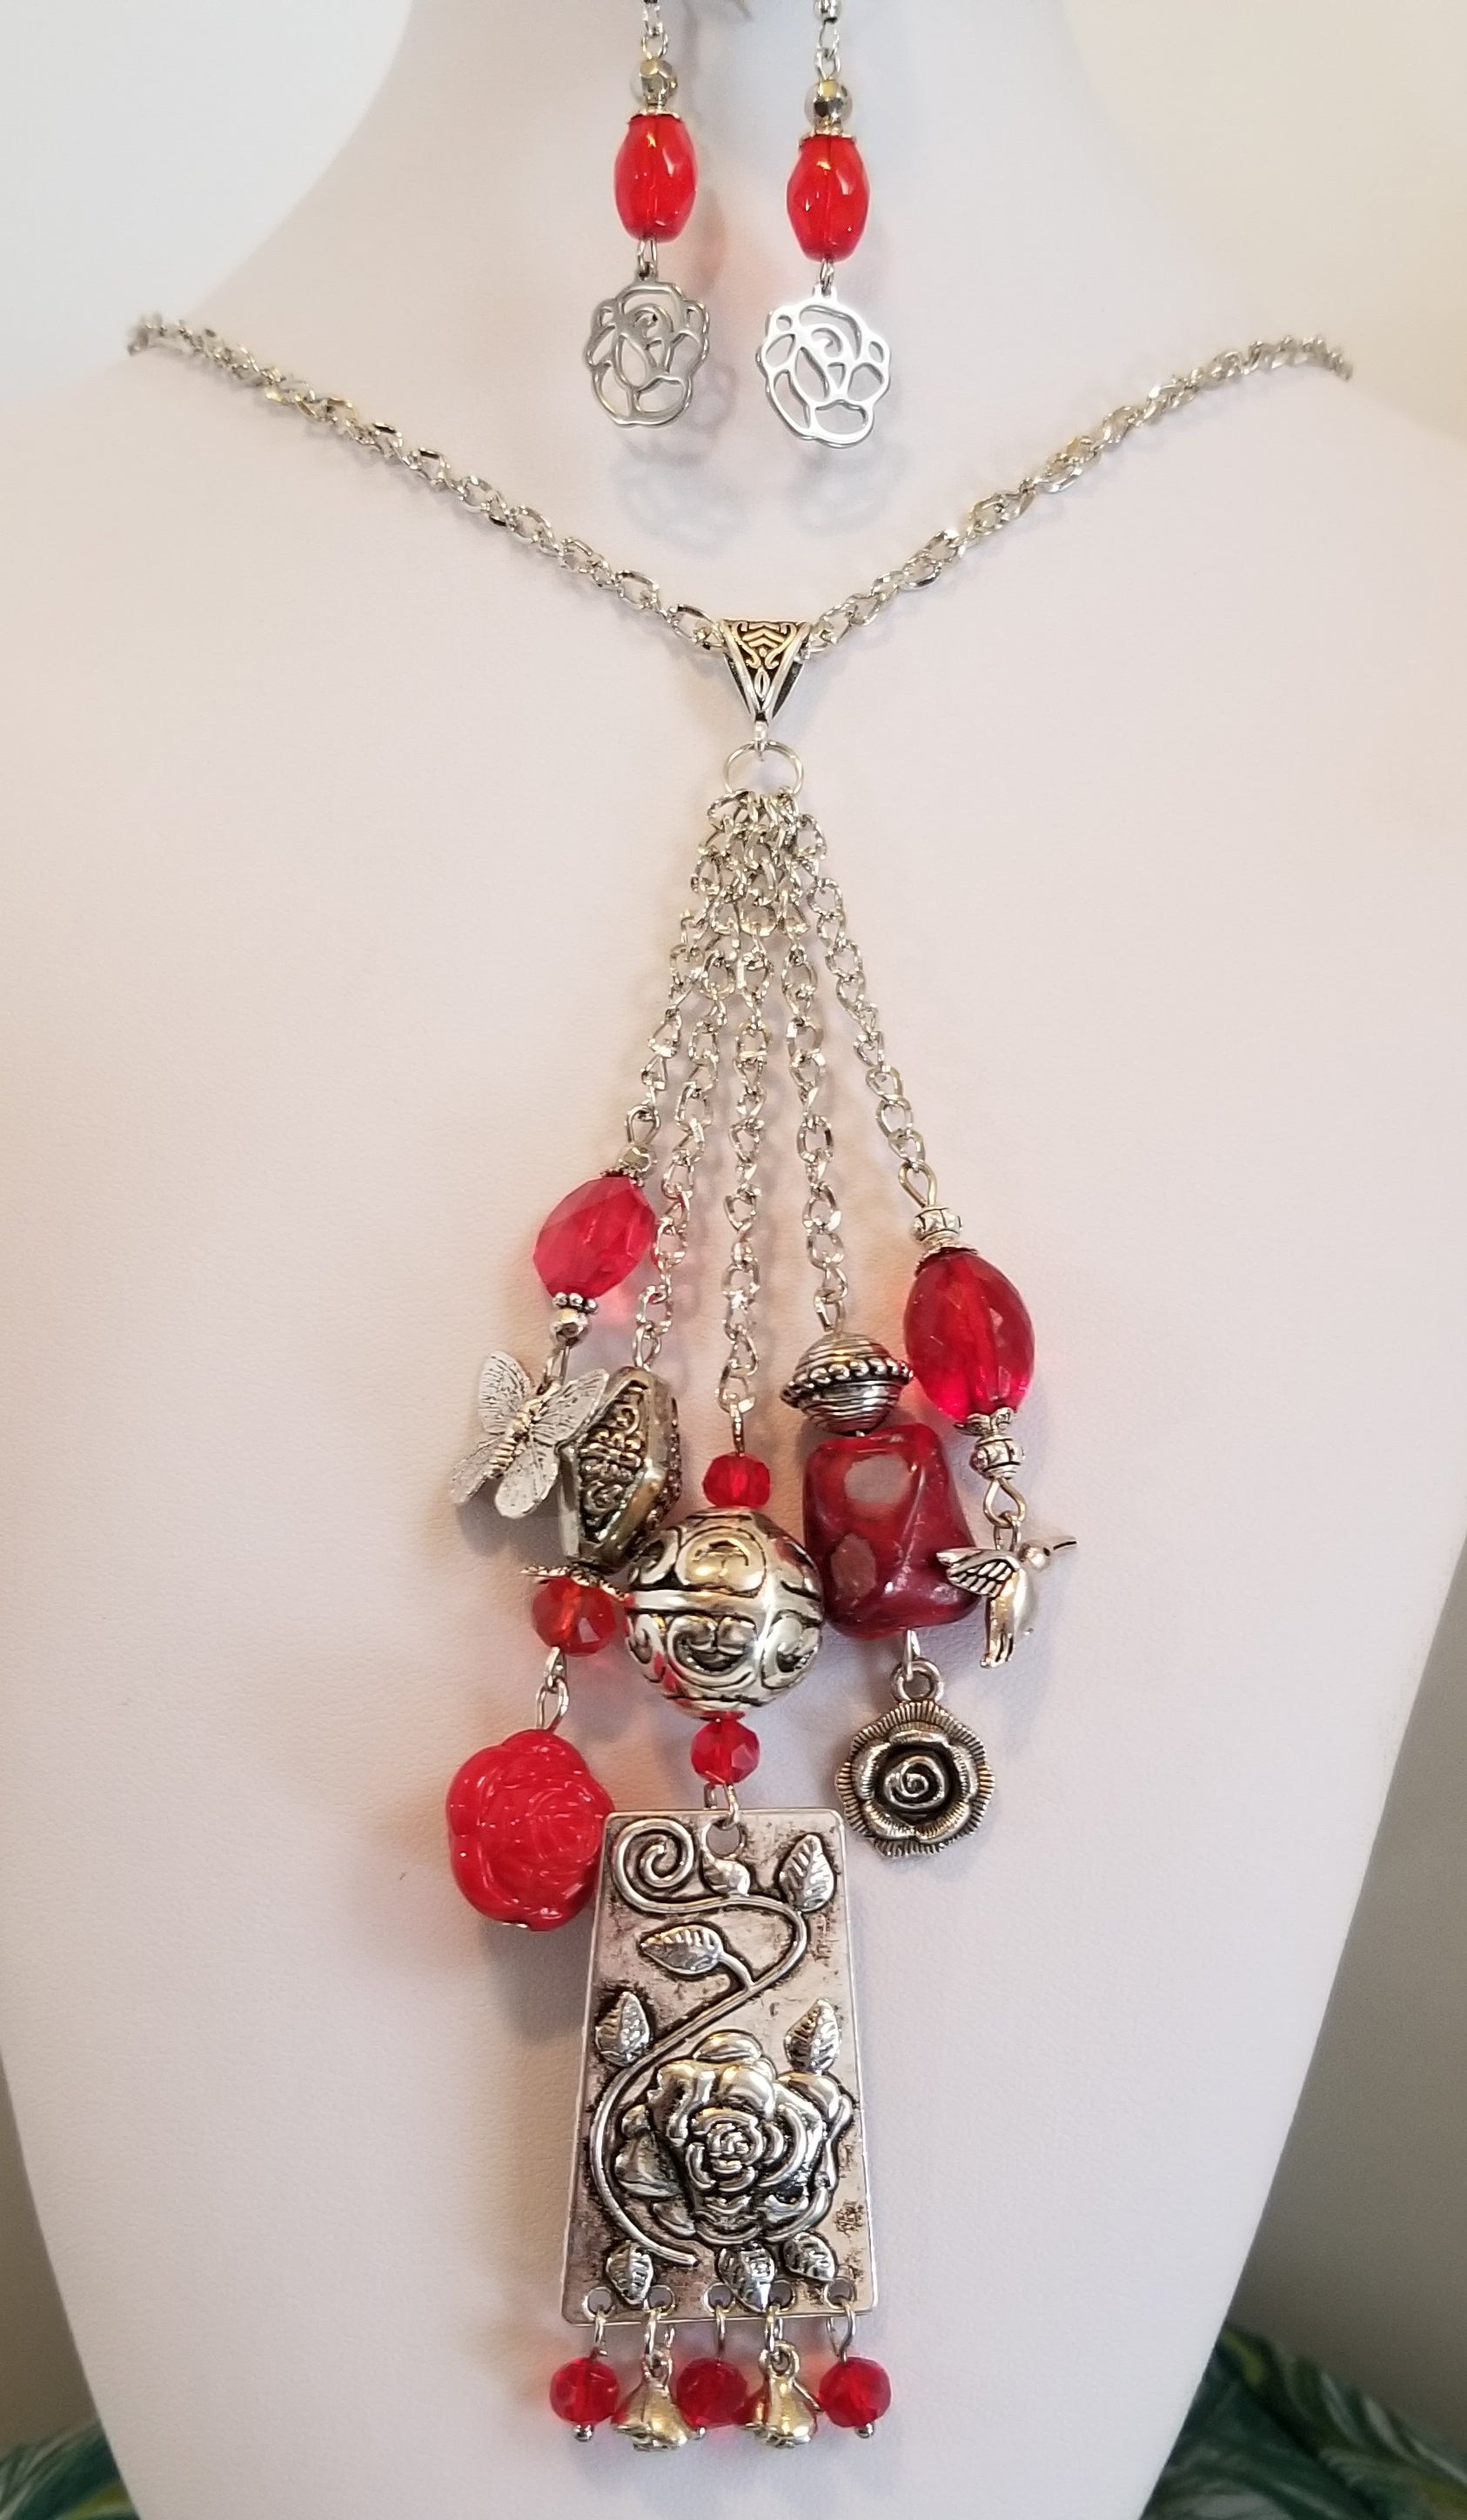 The Rose Necklace with Earrings